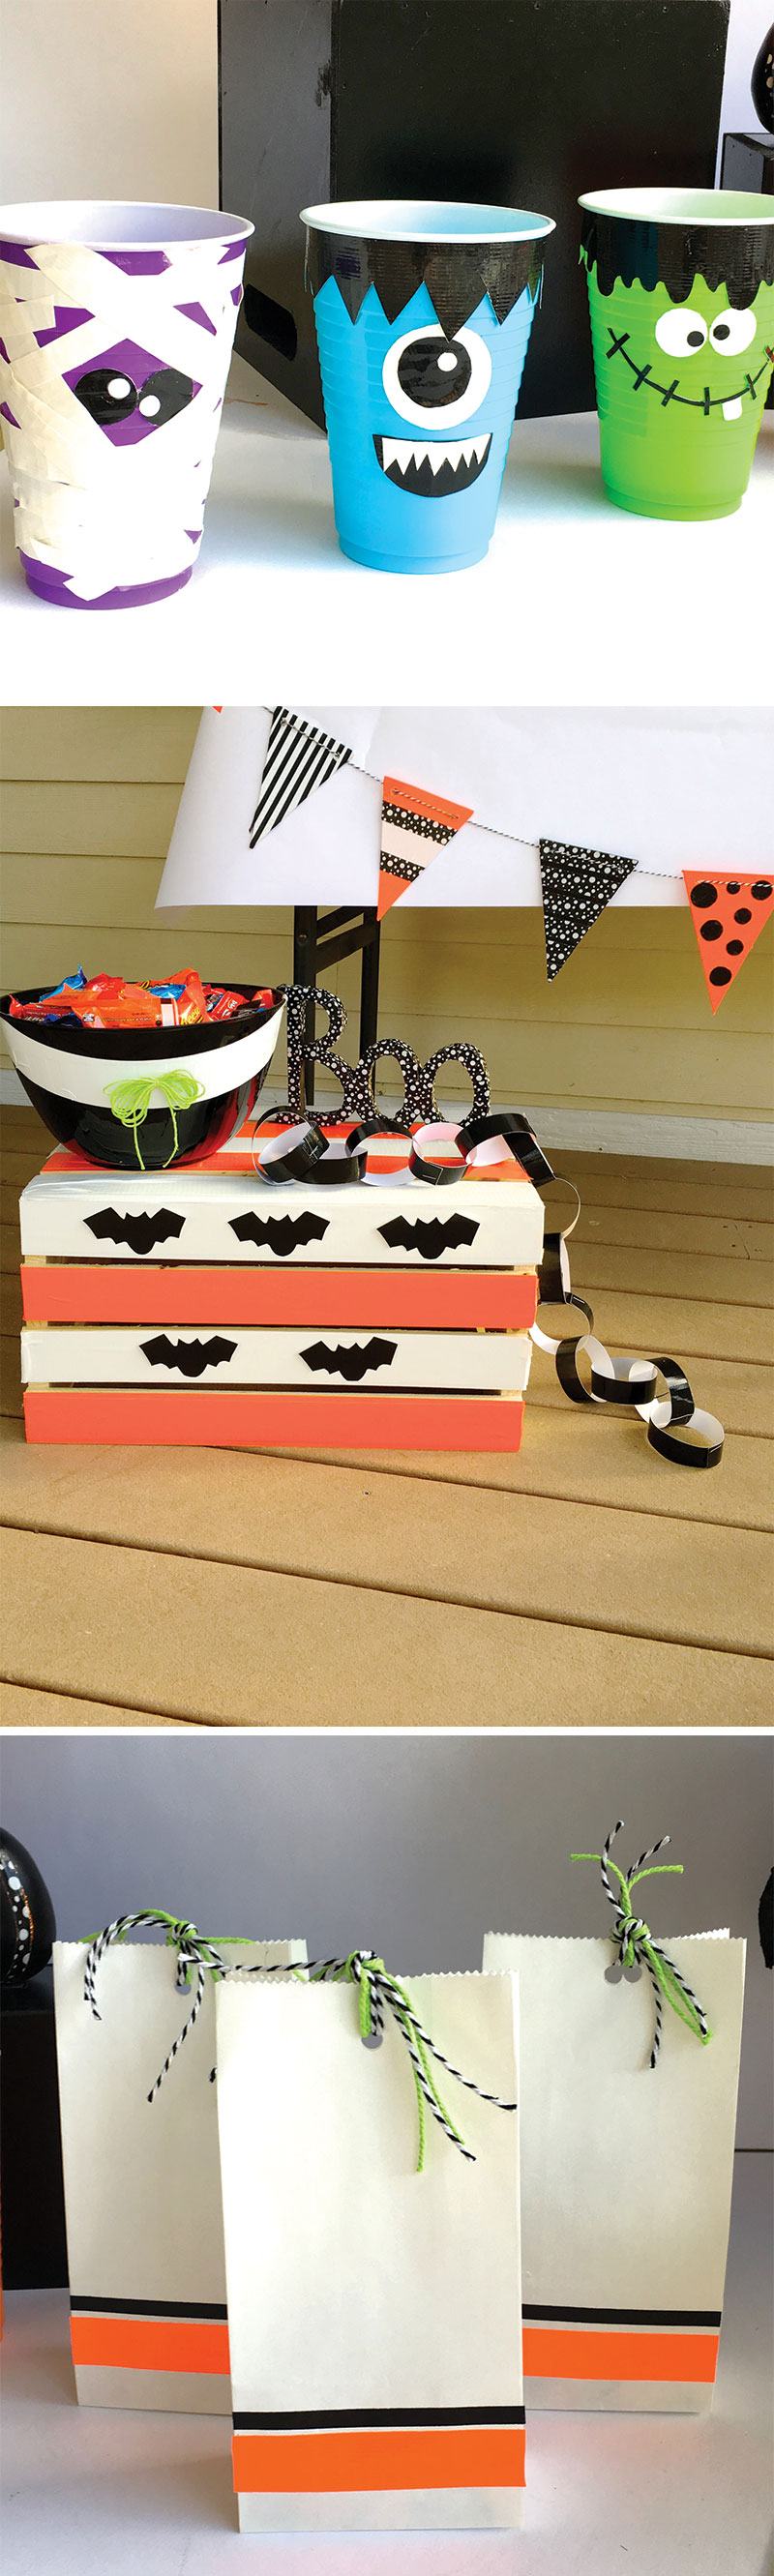 5 Simple Ways to Decorate for your Halloween Party